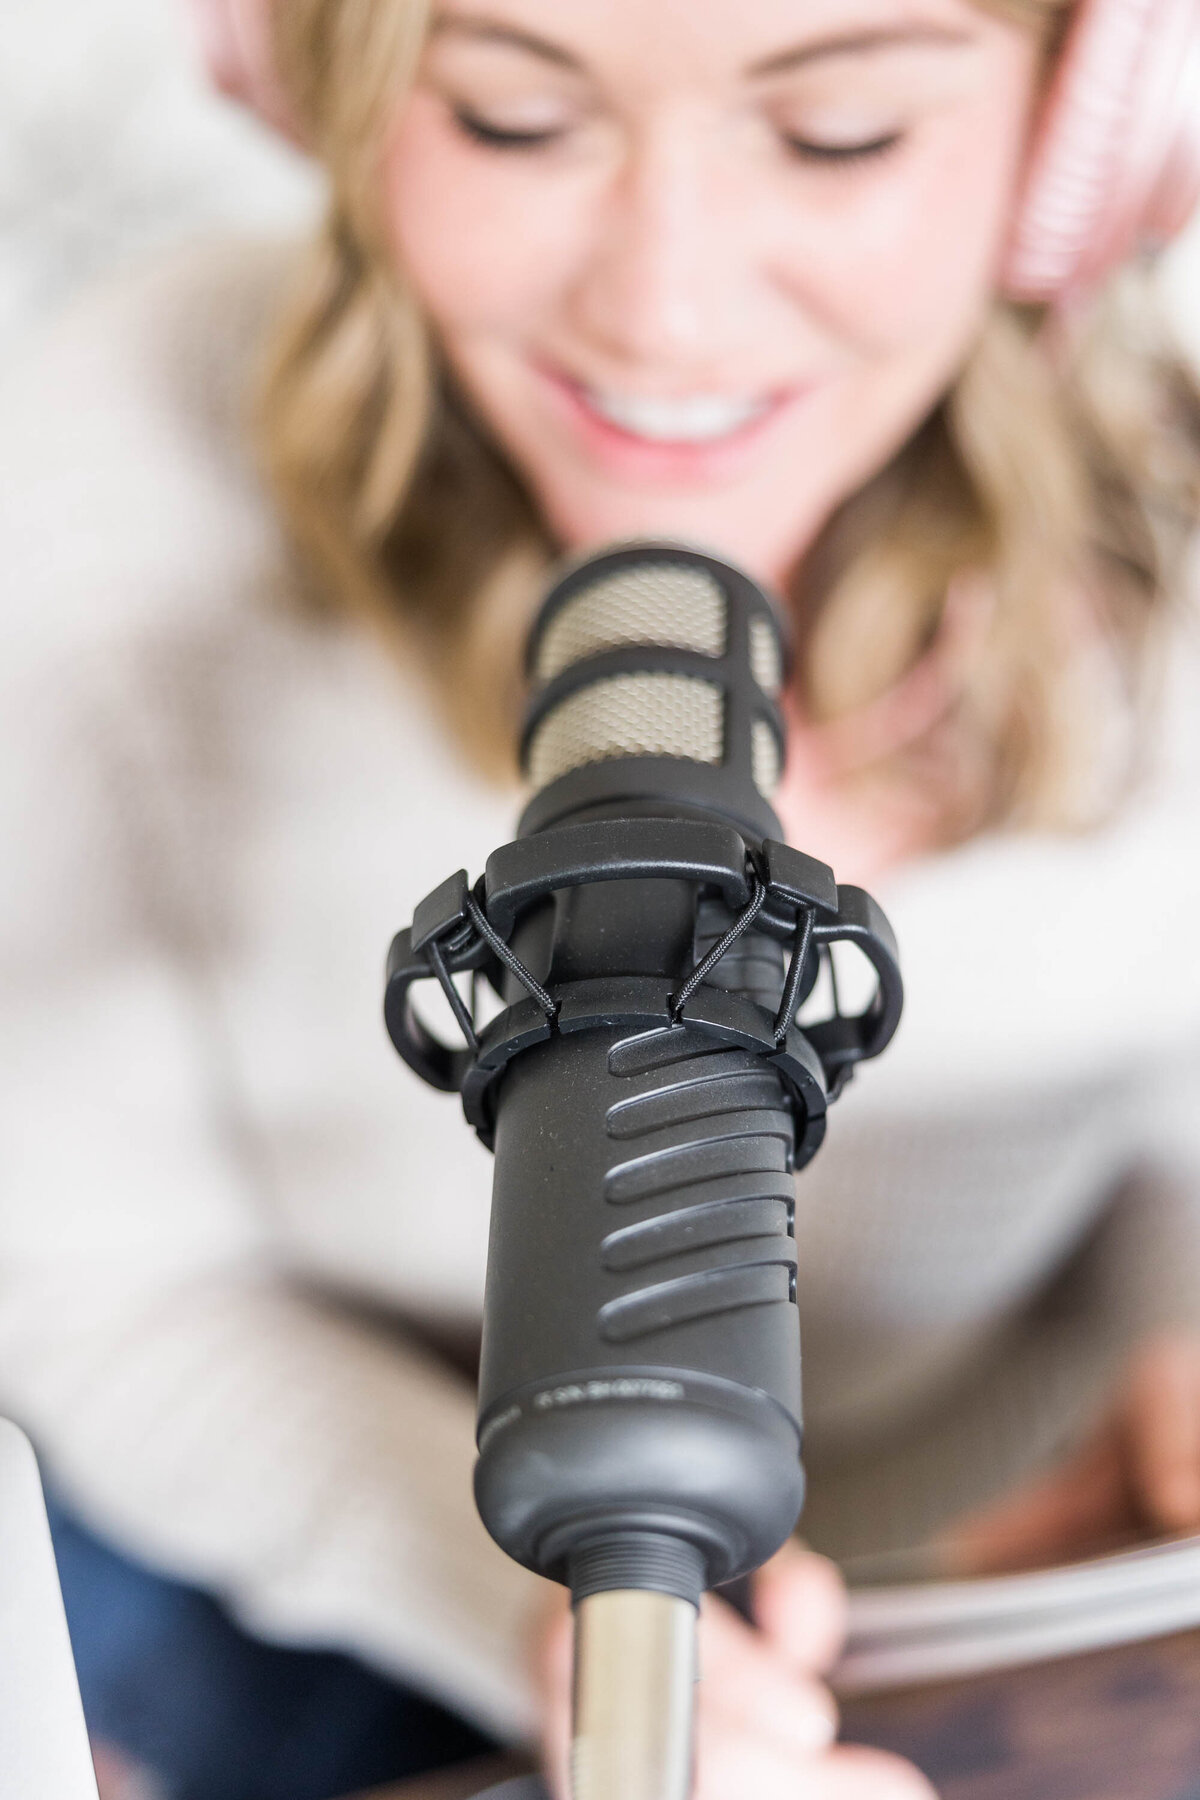 personal-branding-photography-podcast-host-speaking-into-microphone